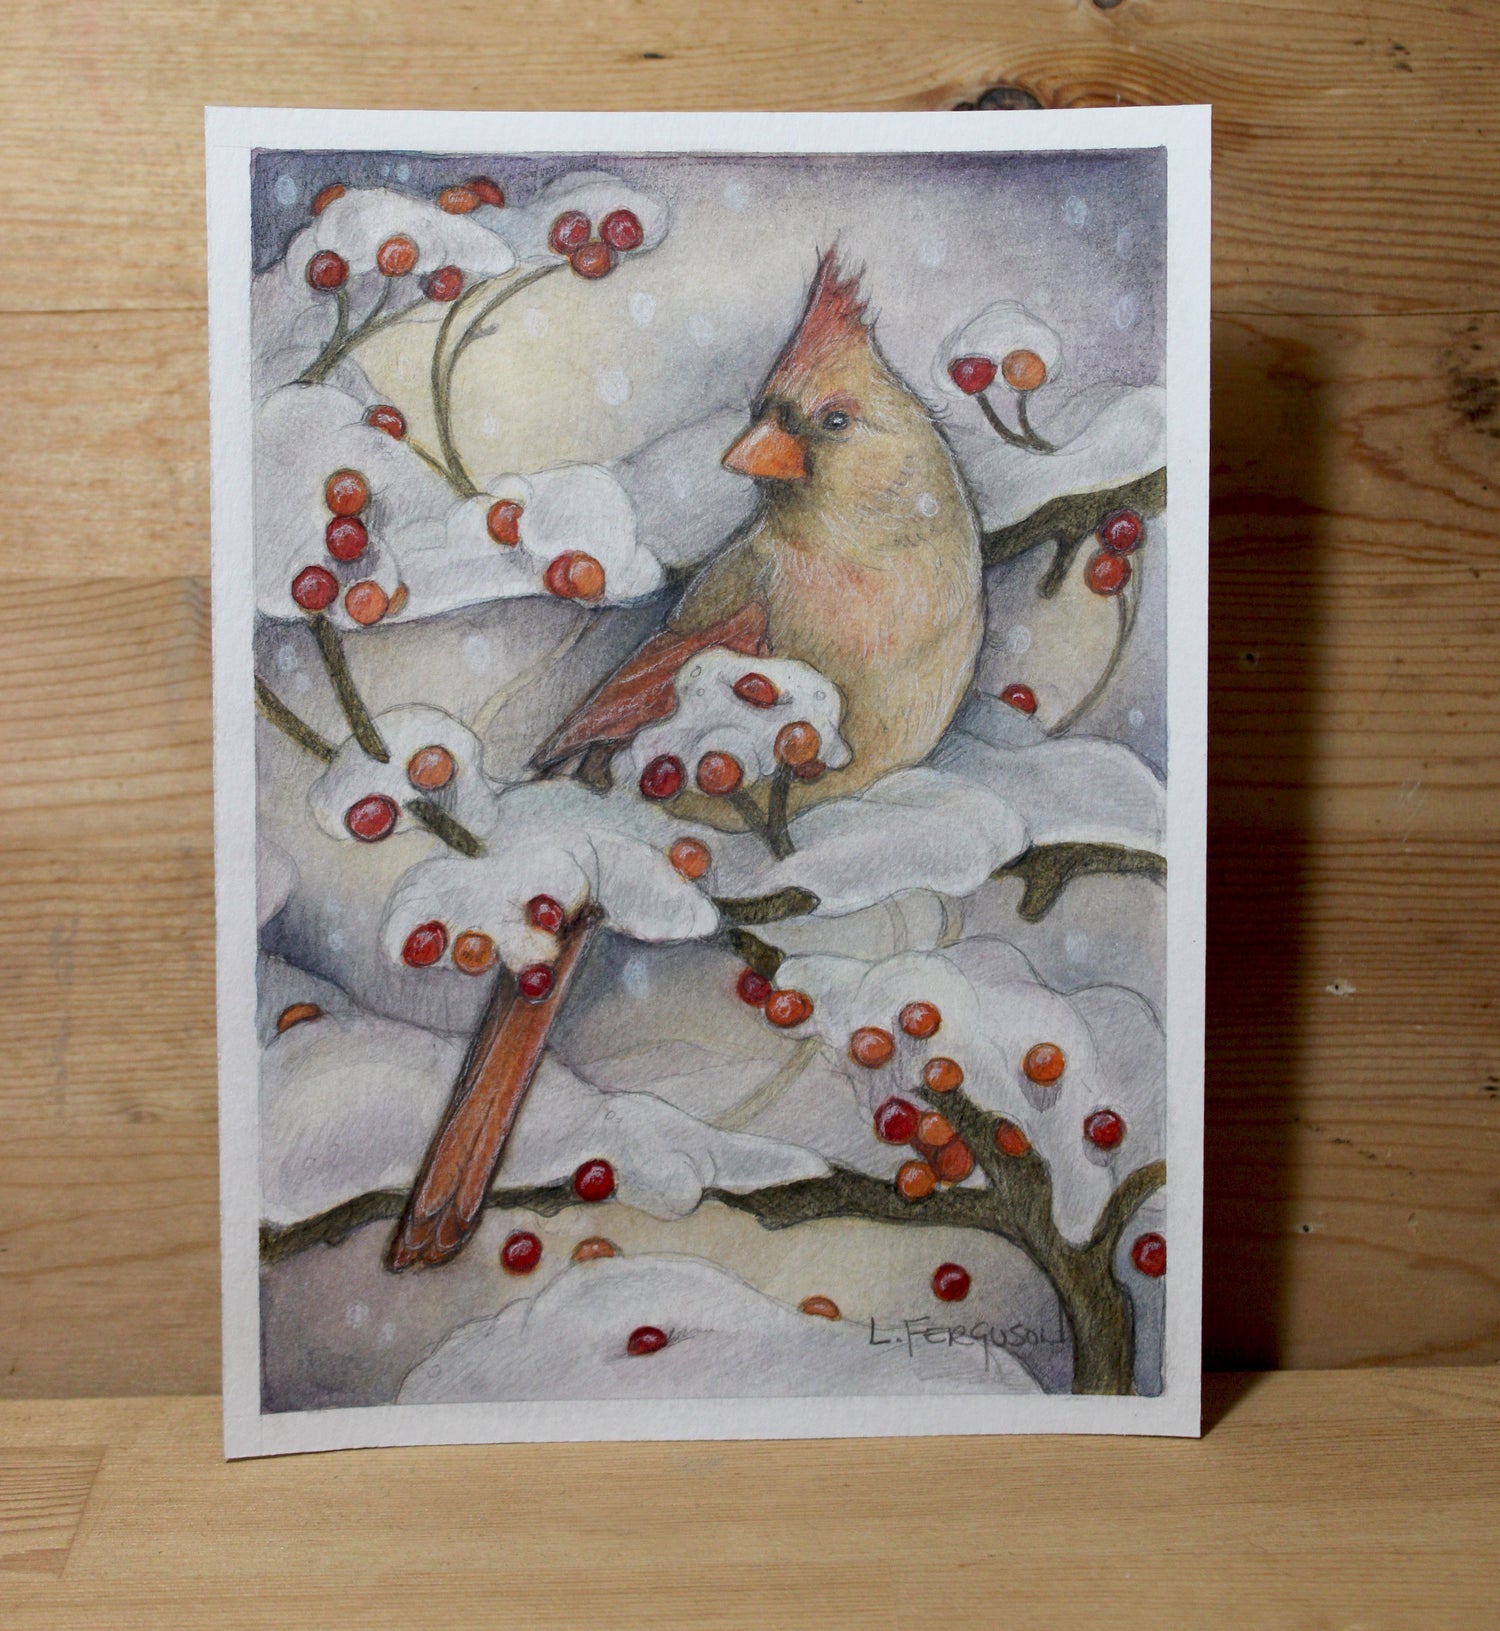 Tiny art featuring female Northern Cardinal sitting in tree with winter berries